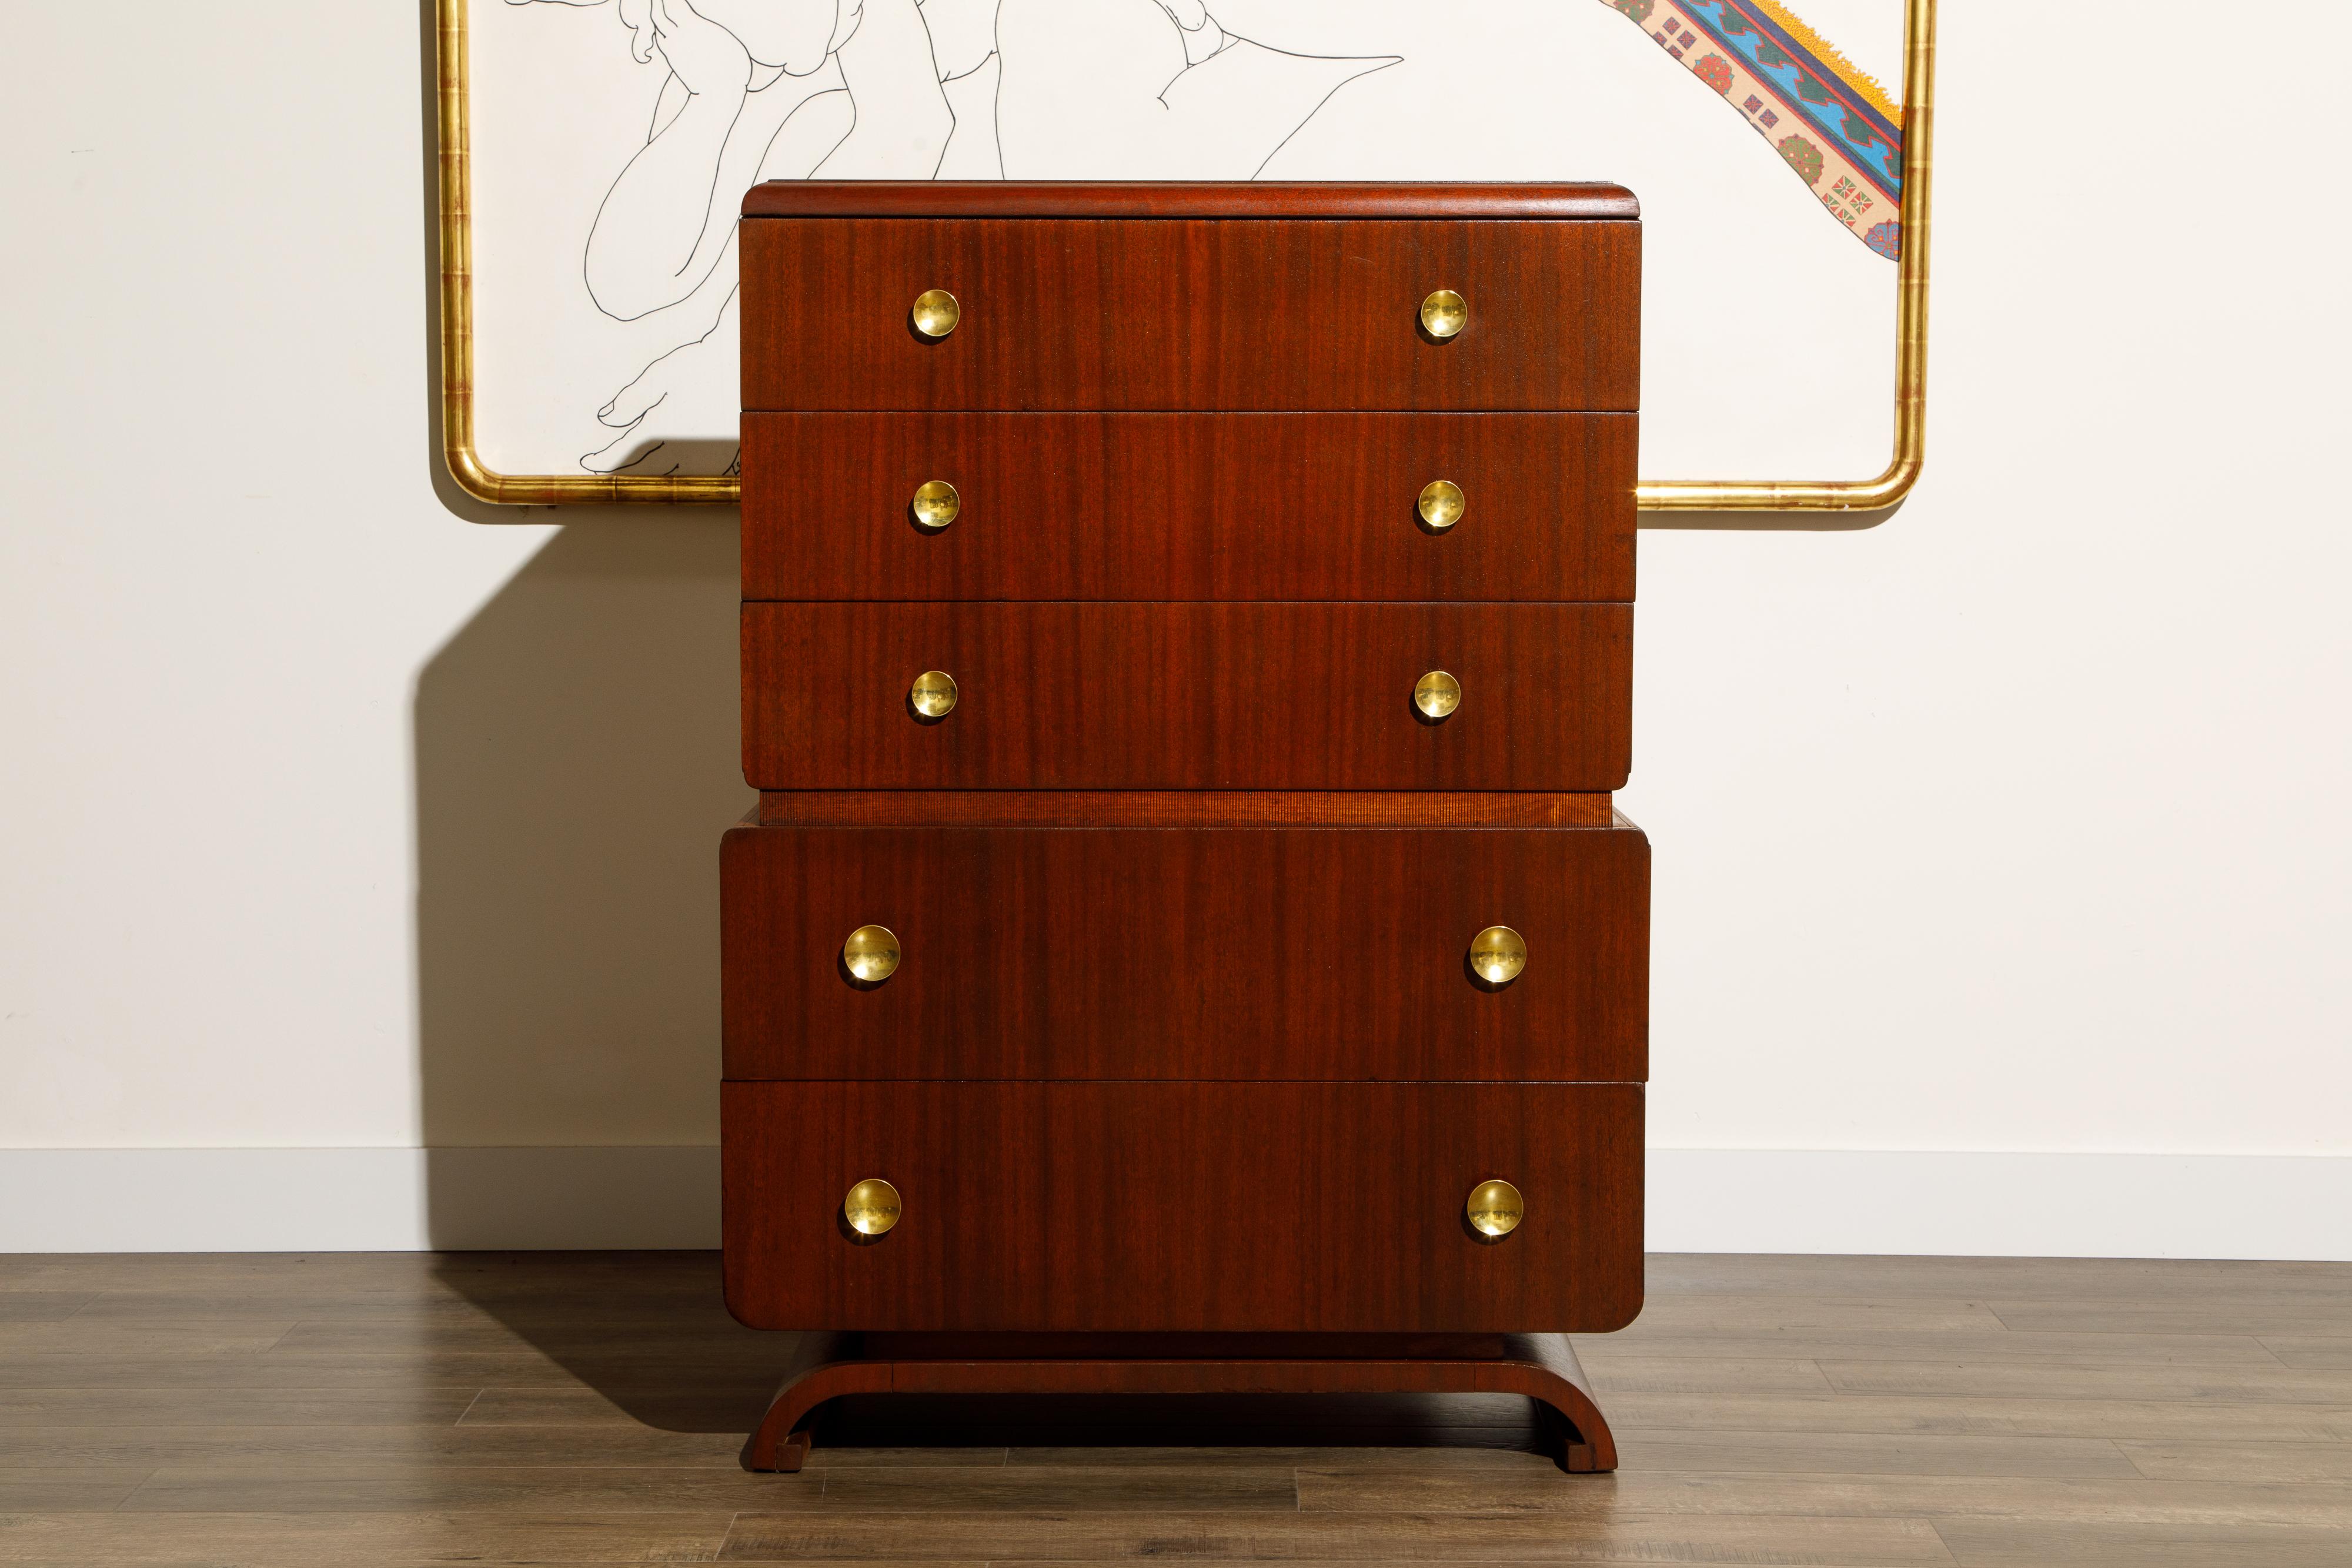 This beautiful circa 1940s restored highboy dresser by John Stuart Inc, New York, was just refinished and features a floating design with rounded edges and five drawers, each drawer with two large round brass pulls. Signed on the top drawer with the